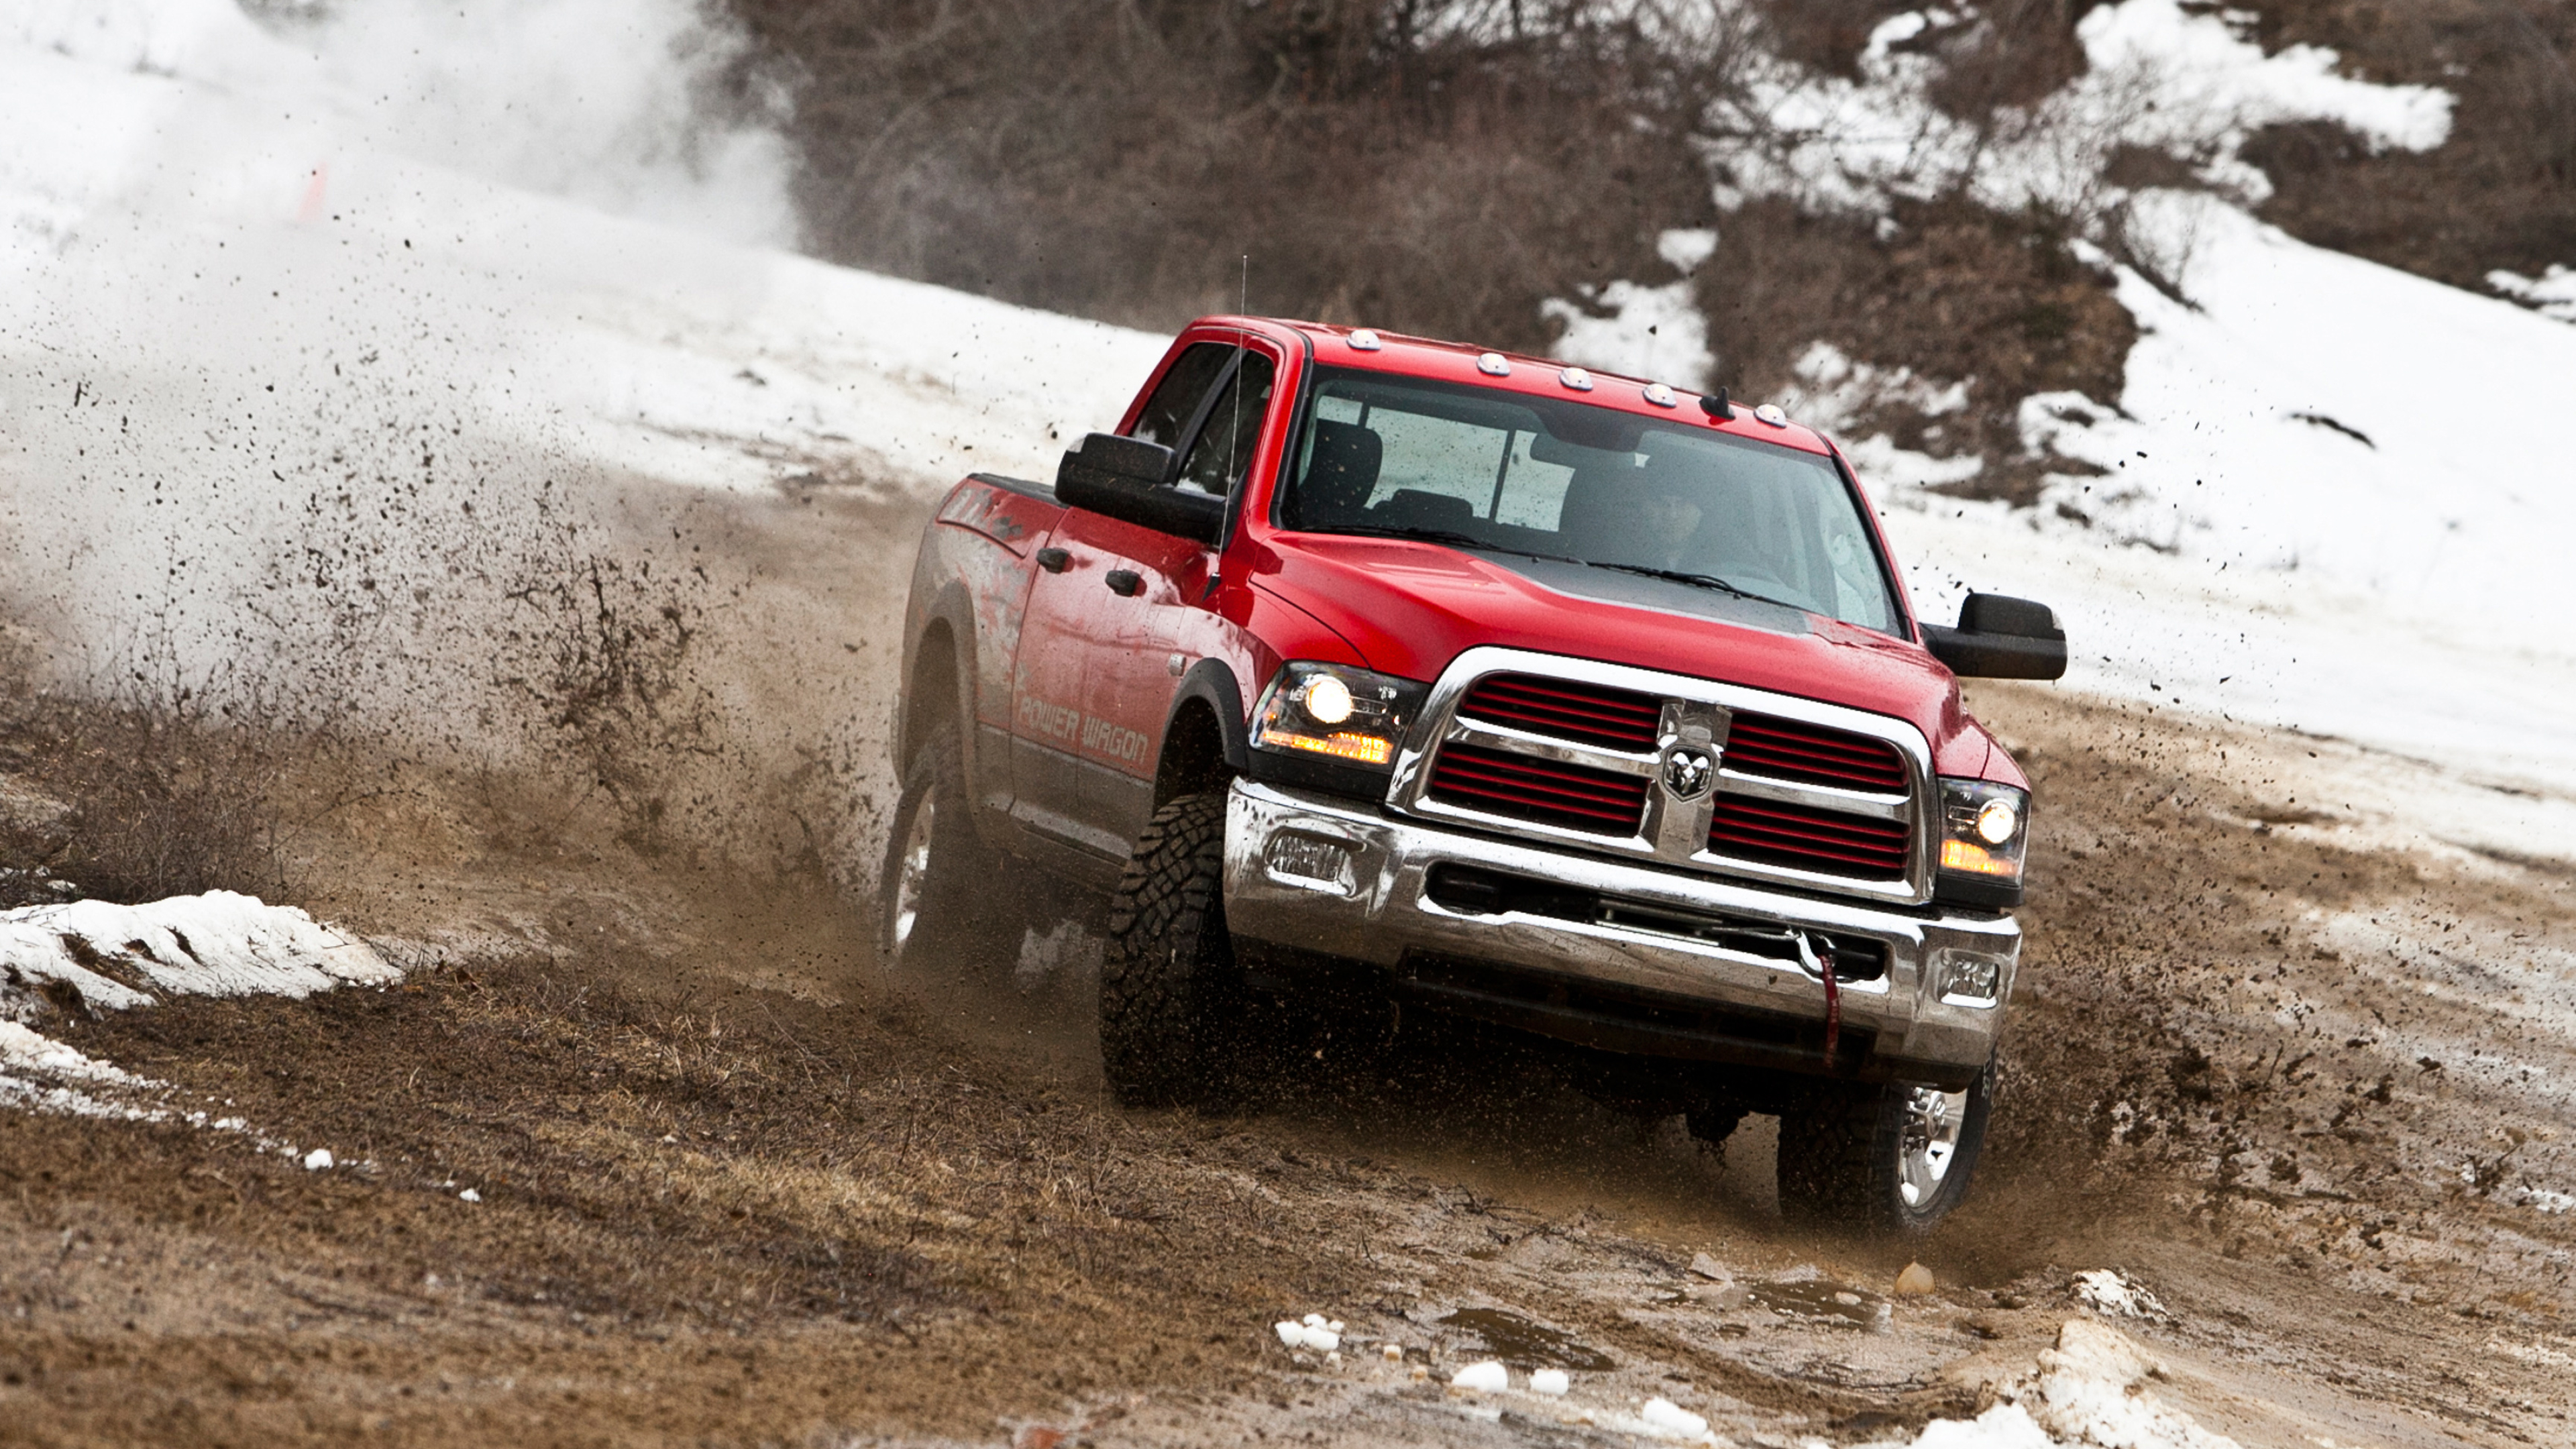 Off-road Driving: 2014 Ram 2500 Power Wagon, Most powerful pickup truck in the world. 3840x2160 4K Wallpaper.